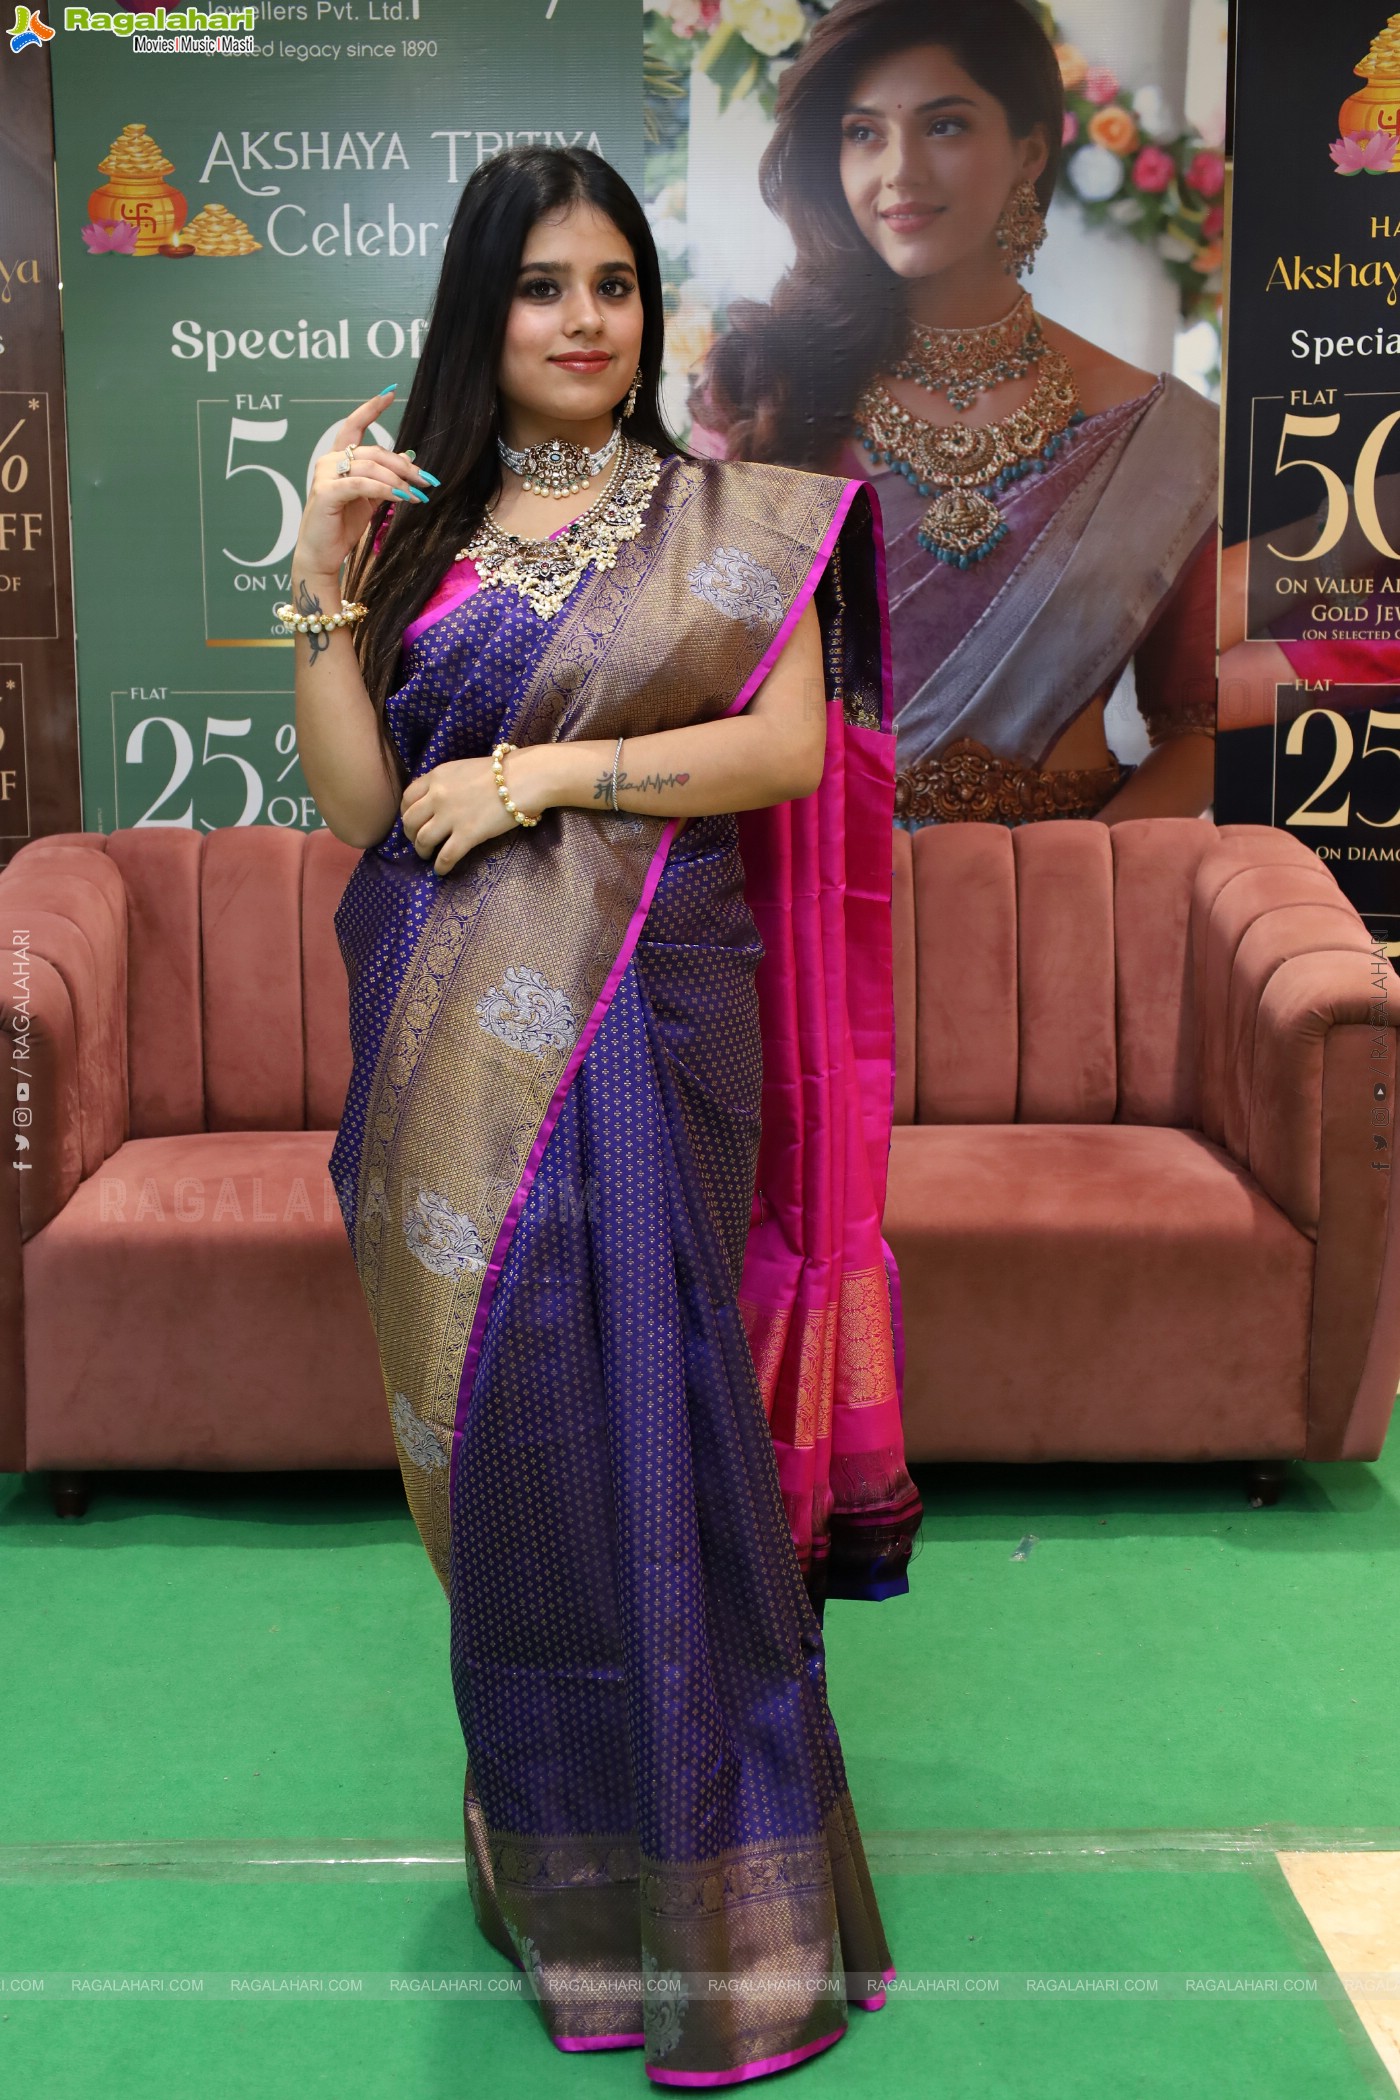 Launch of Akshaya Tritiya Special Jewellery Collection at Manepally Jewellers